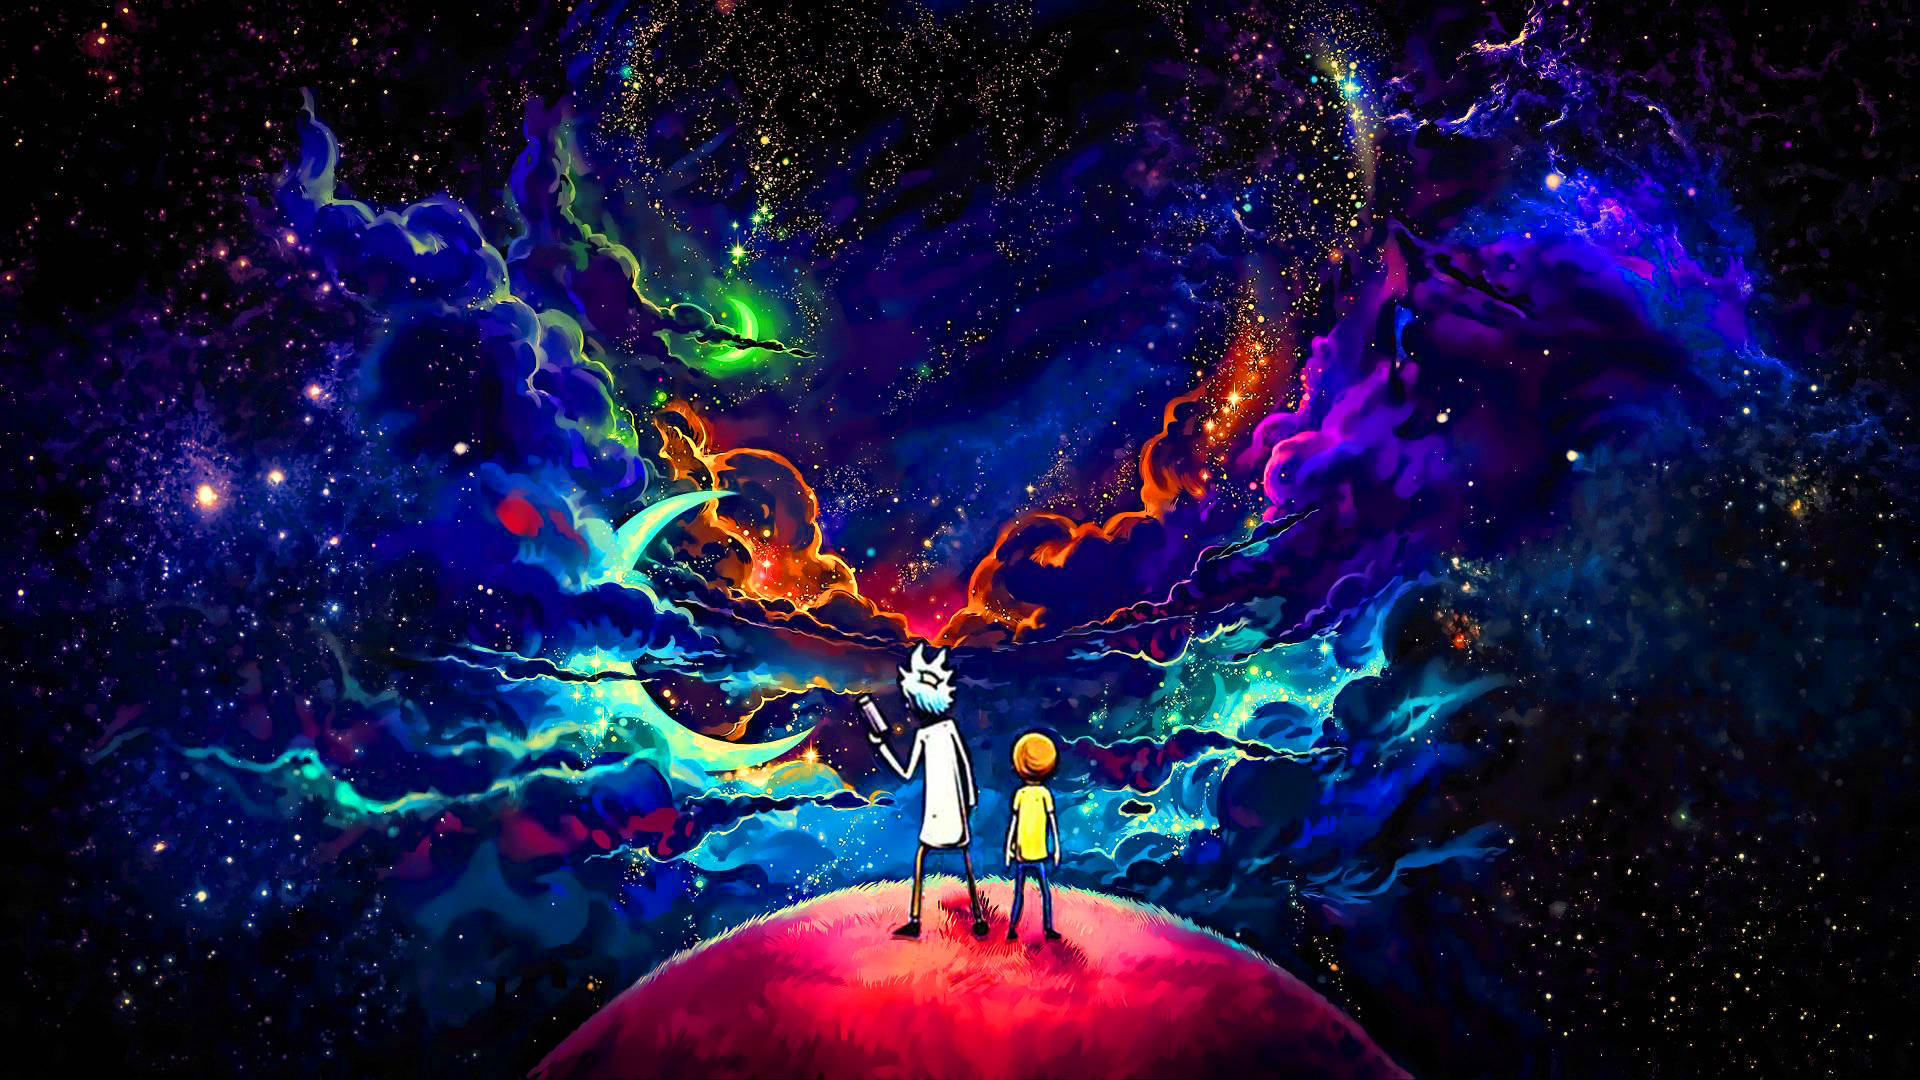 Dope Digital Galaxy In Rick And Morty Wallpaper